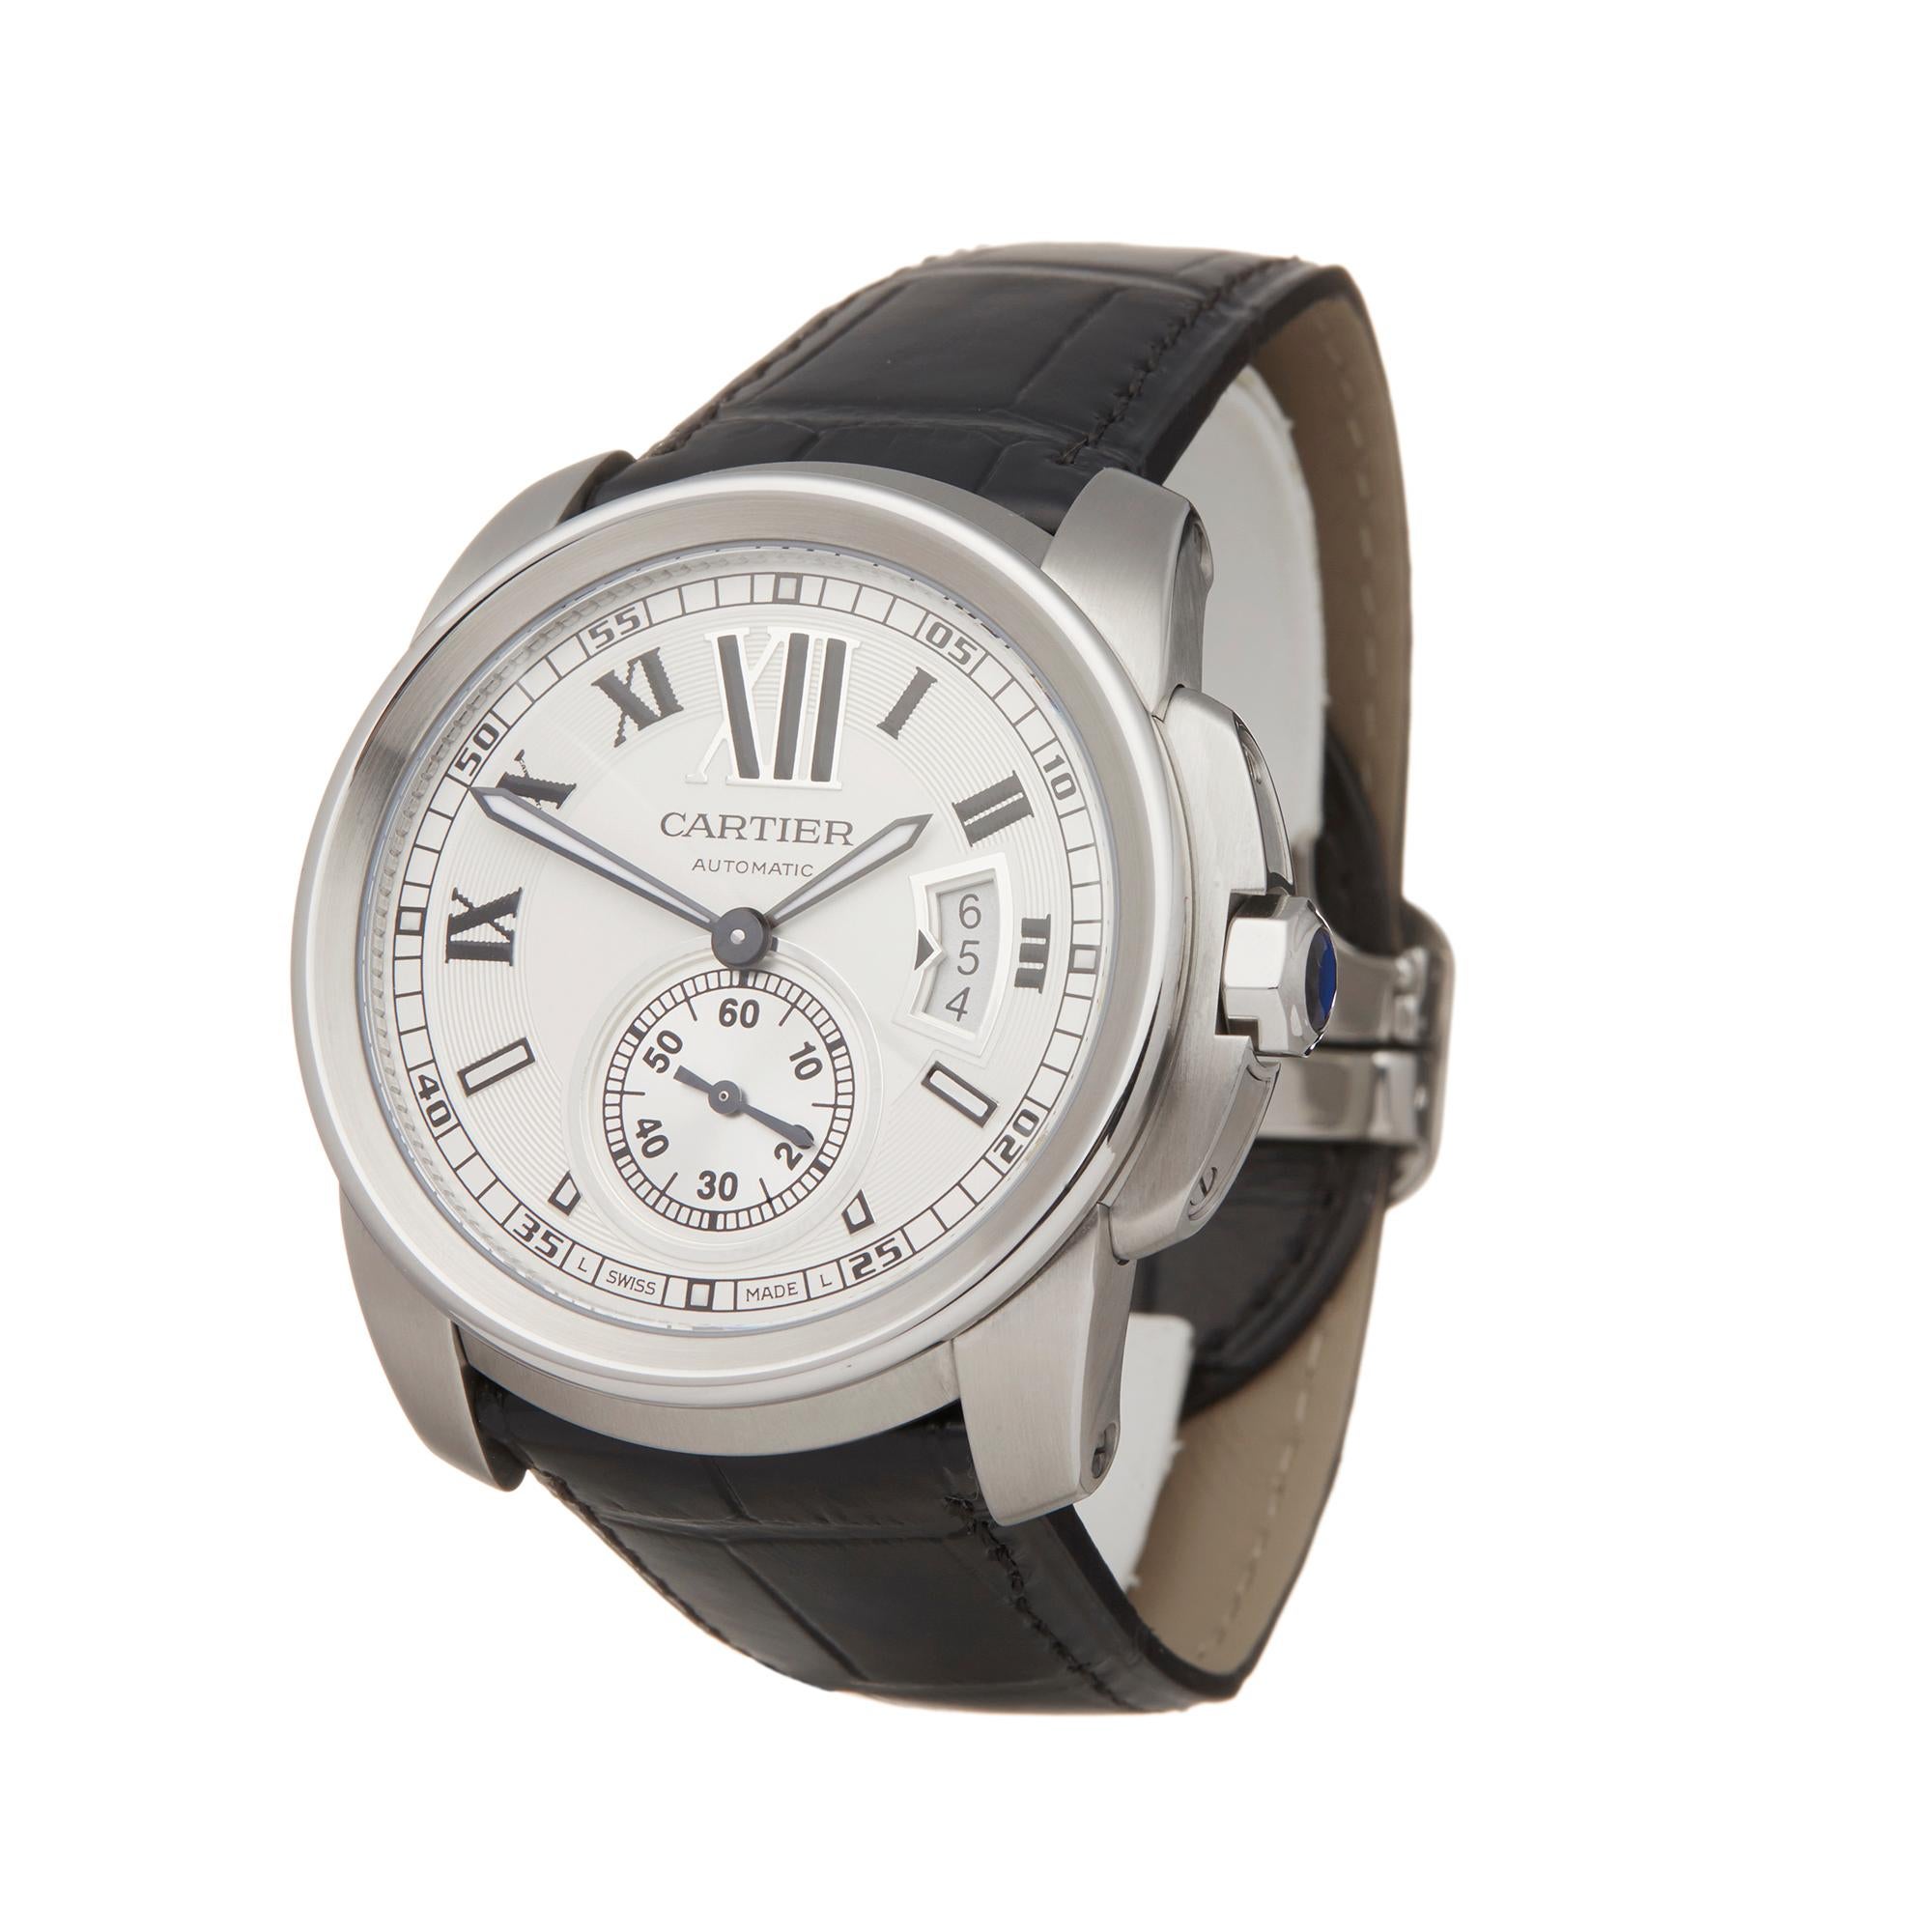 Reference: W5810
Manufacturer: Cartier
Model: Calibre
Model Reference: W7100013 or 3299
Age: 5th May 2010
Gender: Men's
Box and Papers: Box Manuals and Guarantee
Dial: Silver Roman
Glass: Sapphire Crystal
Movement: Automatic
Water Resistance: To